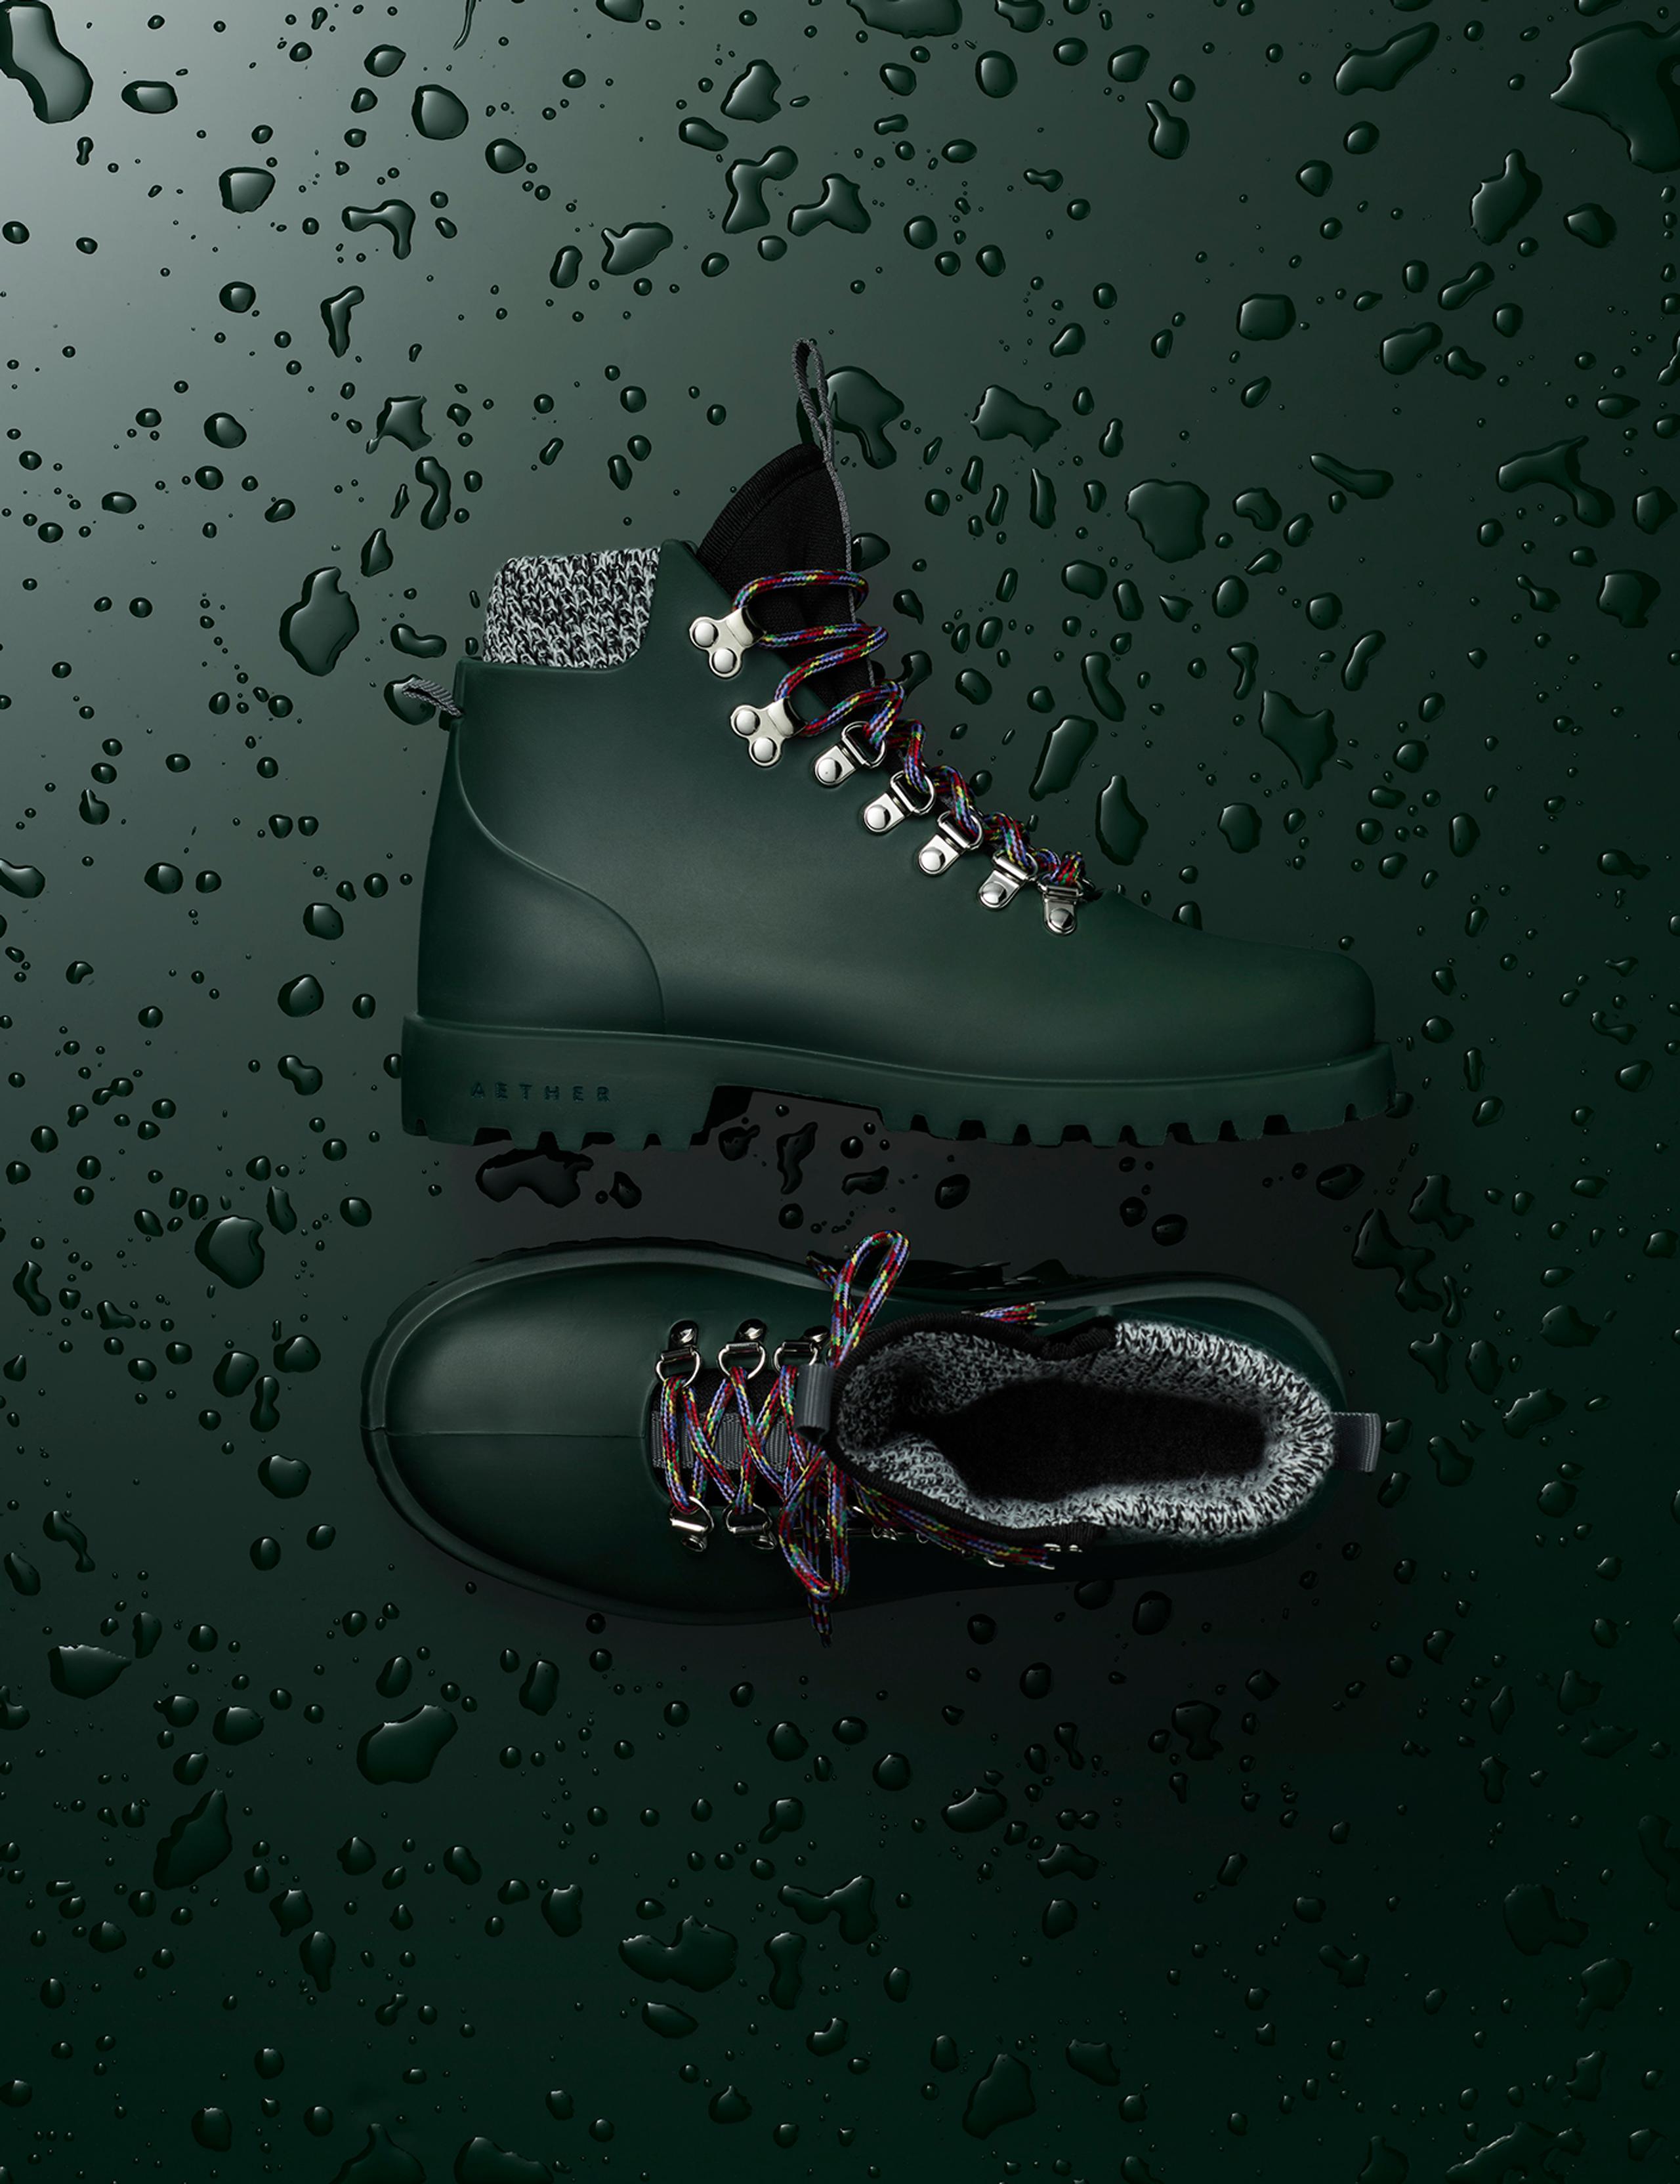 Studio photo of the Women's Rain Boot in profile and top view against a wet background